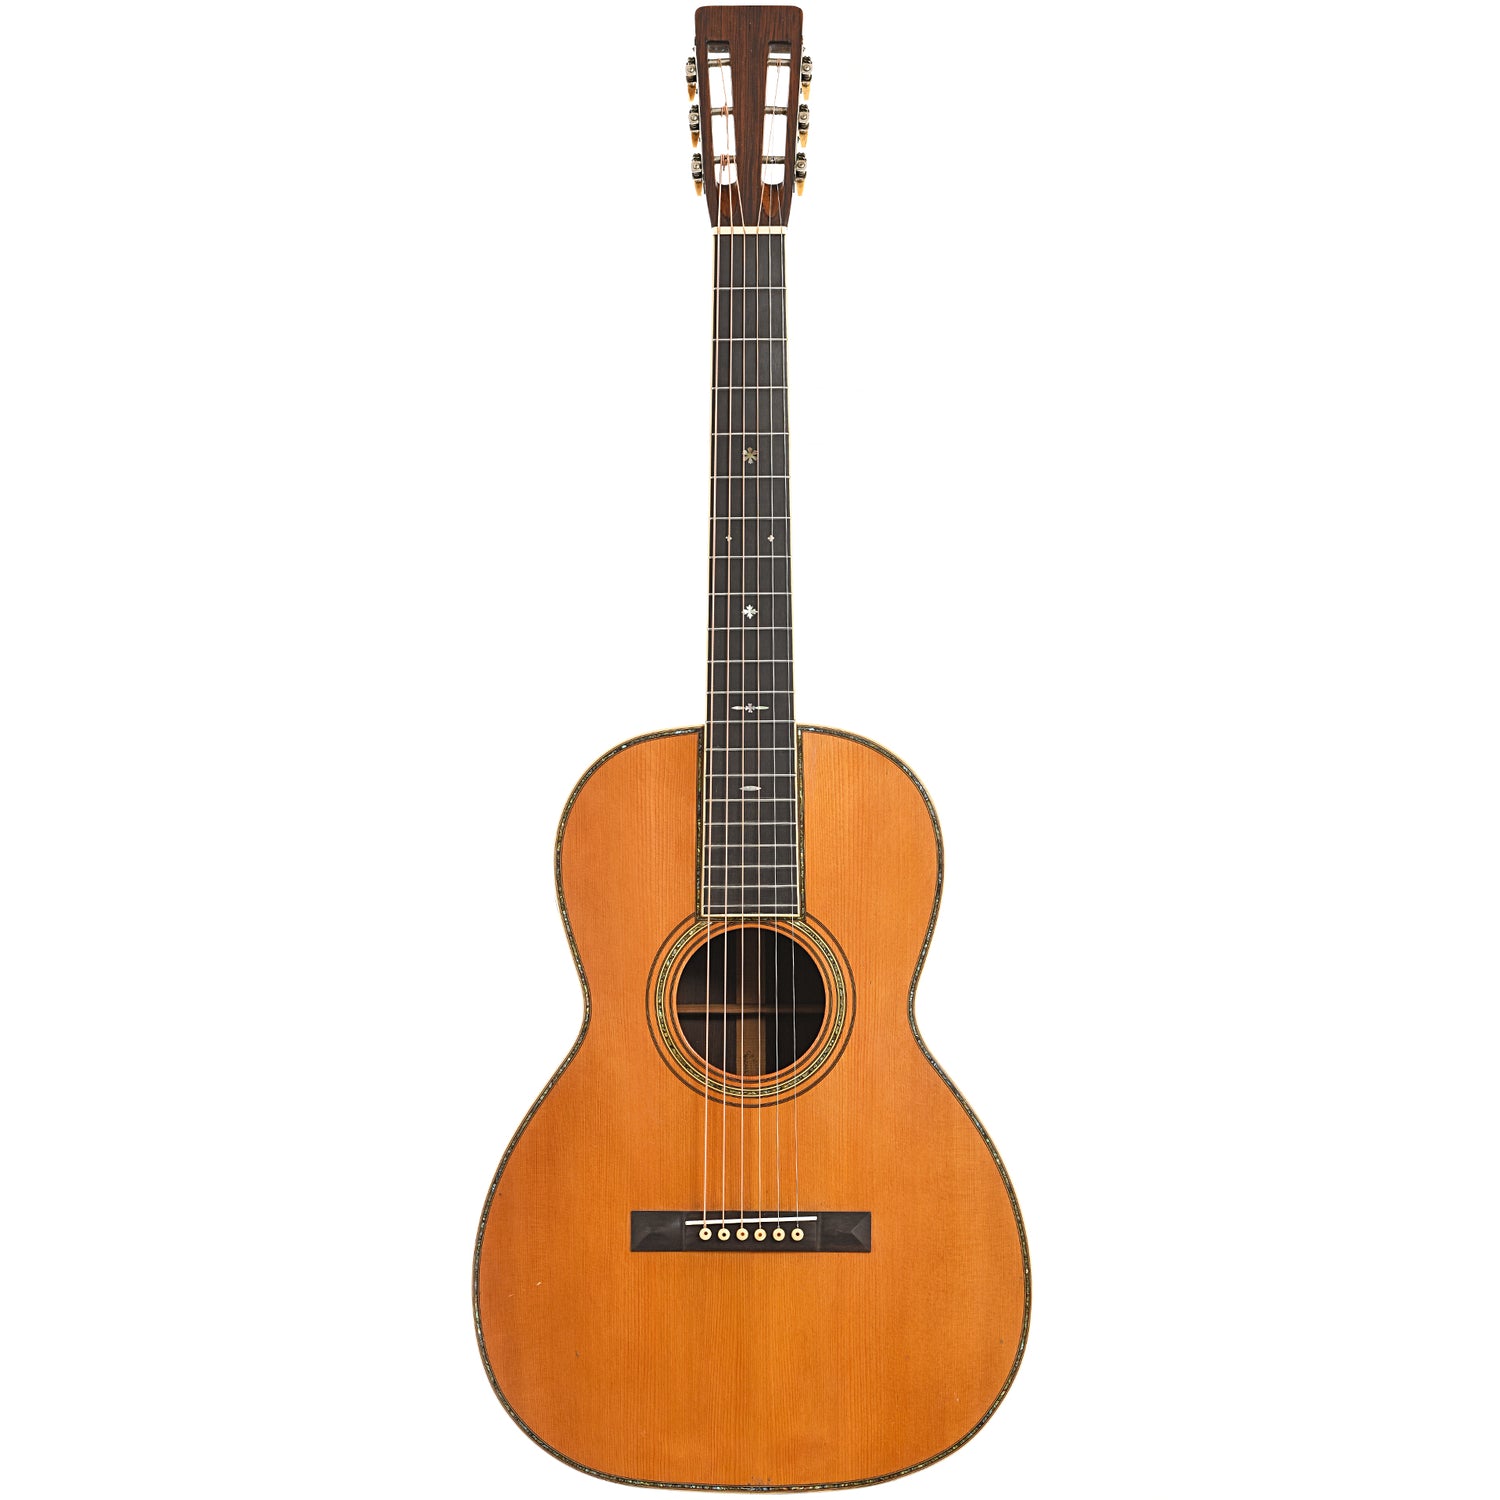 Full front of Martin  00-42 Acoustic